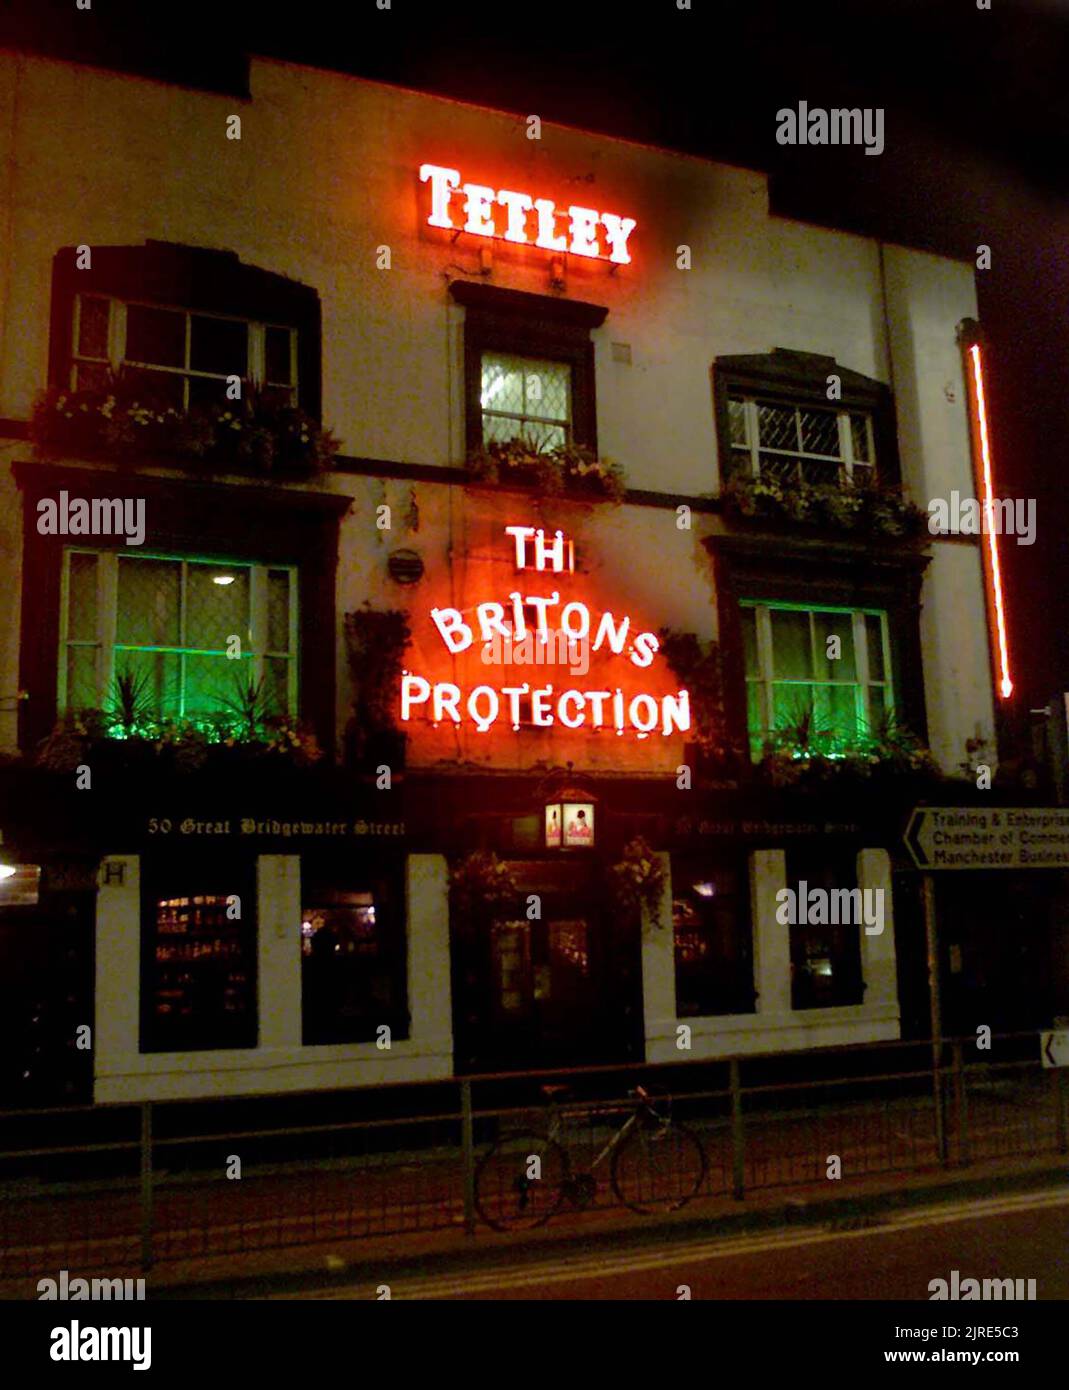 THE BRITONS PROTECTION PUB. Historic pub ( Grade 11 Listed) where victims of Peterloo Massacre were treated in August 16th 1819. The pub boast over 500 whiskies in its collection. MANCHESTER. PICTURE: GARY ROBERTS Stock Photo